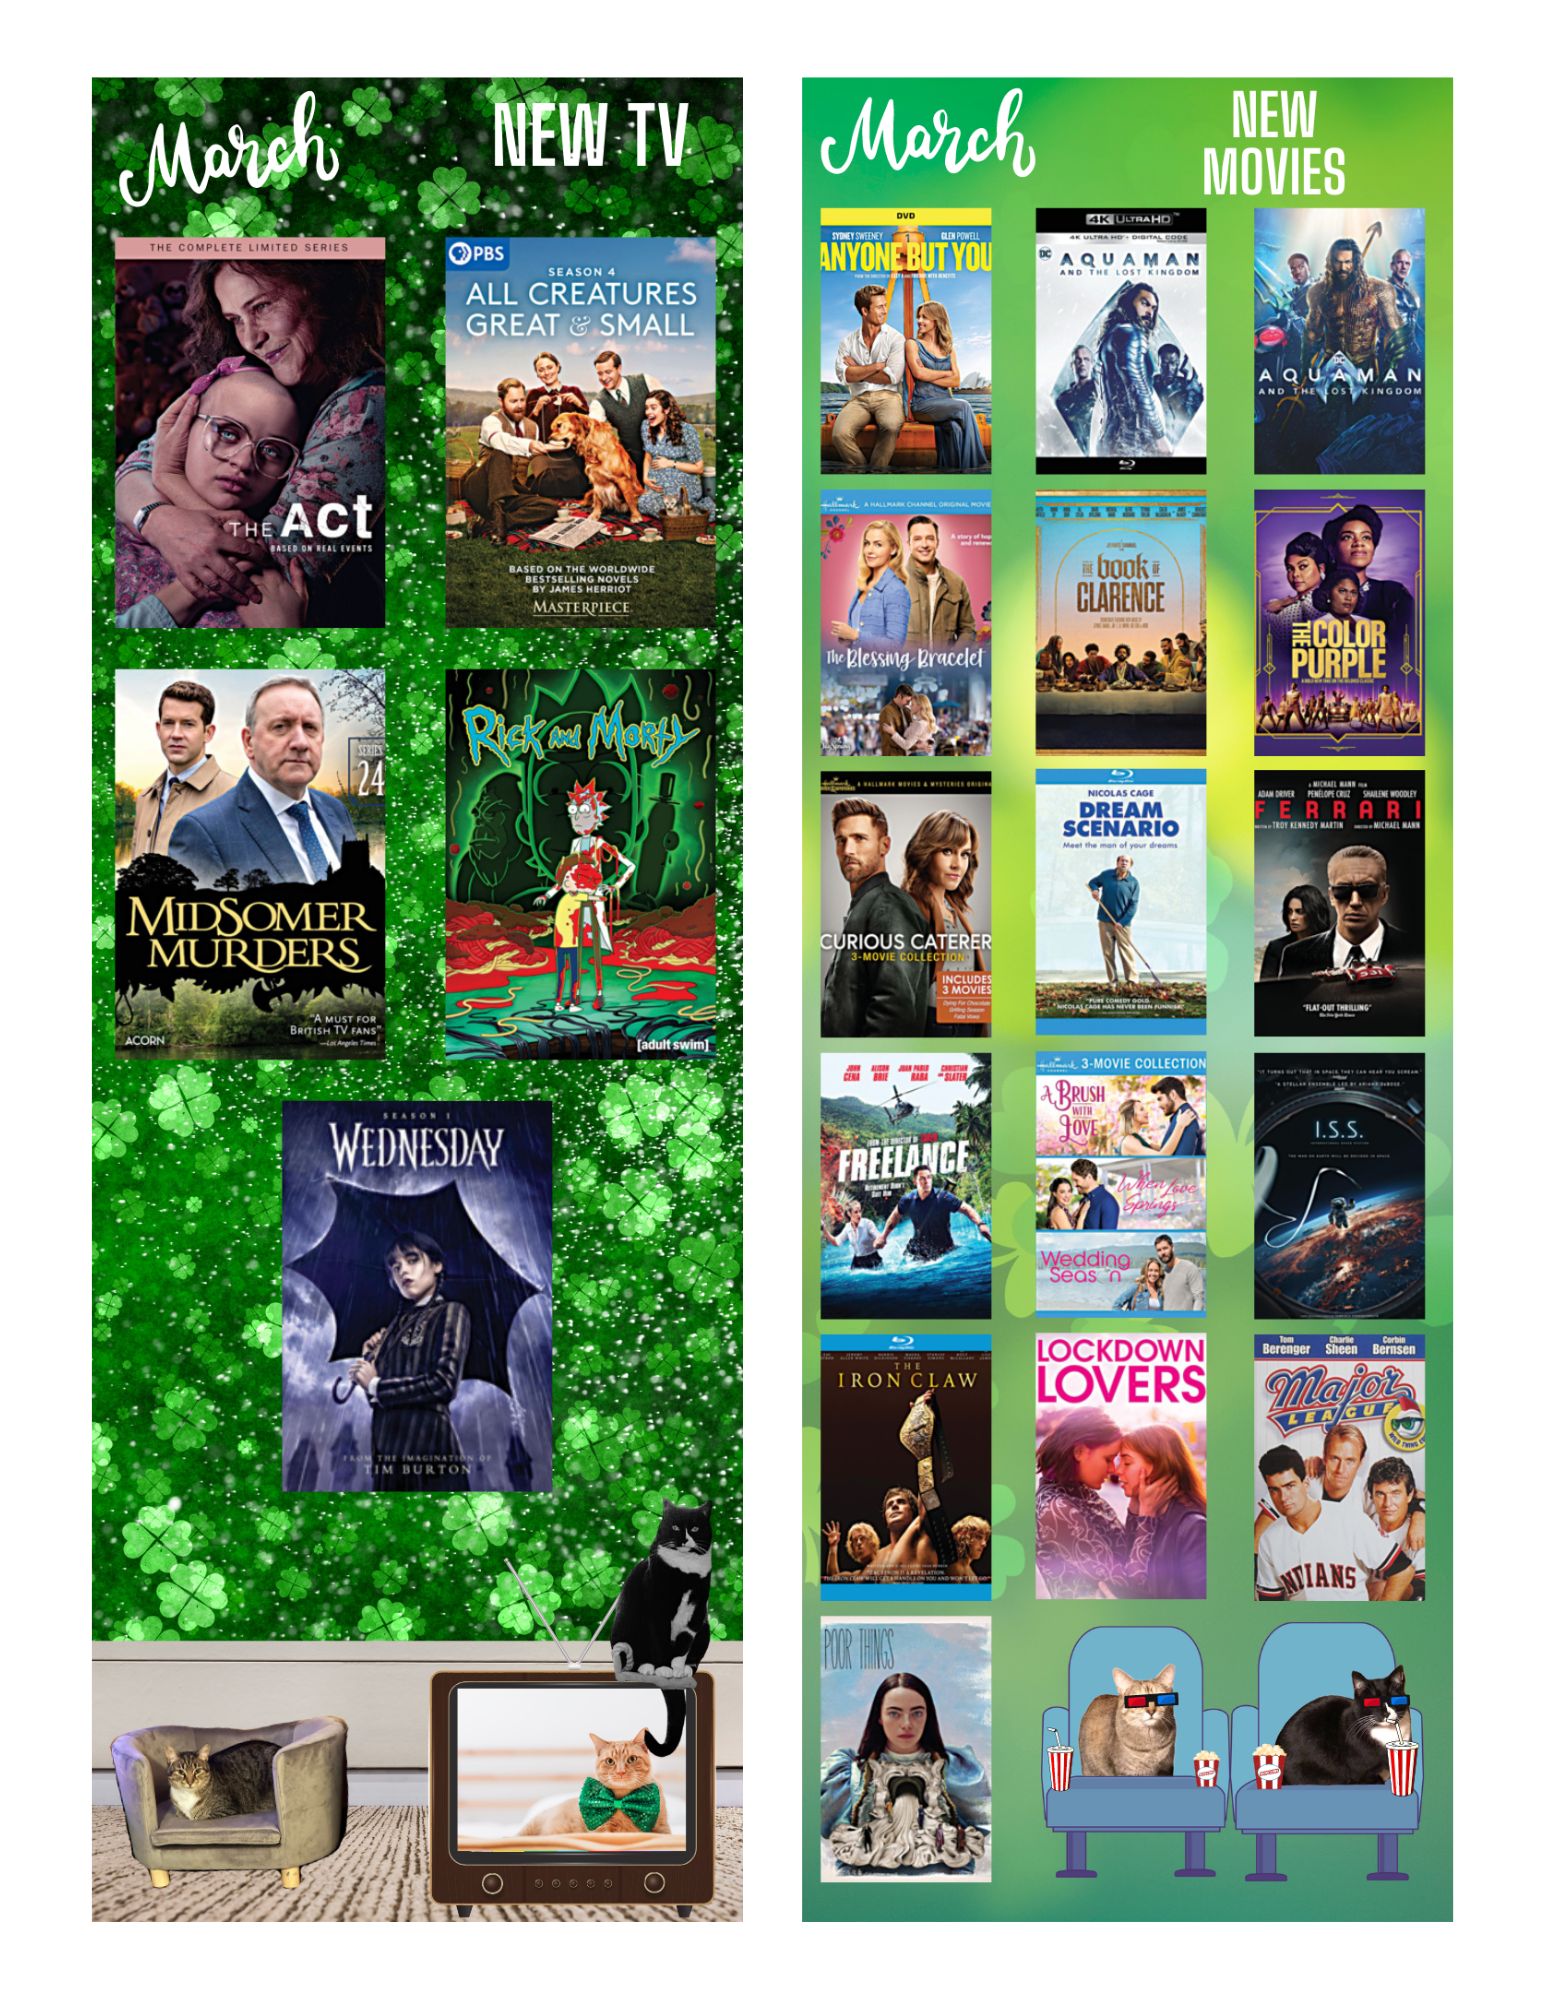 New March Movies & TV